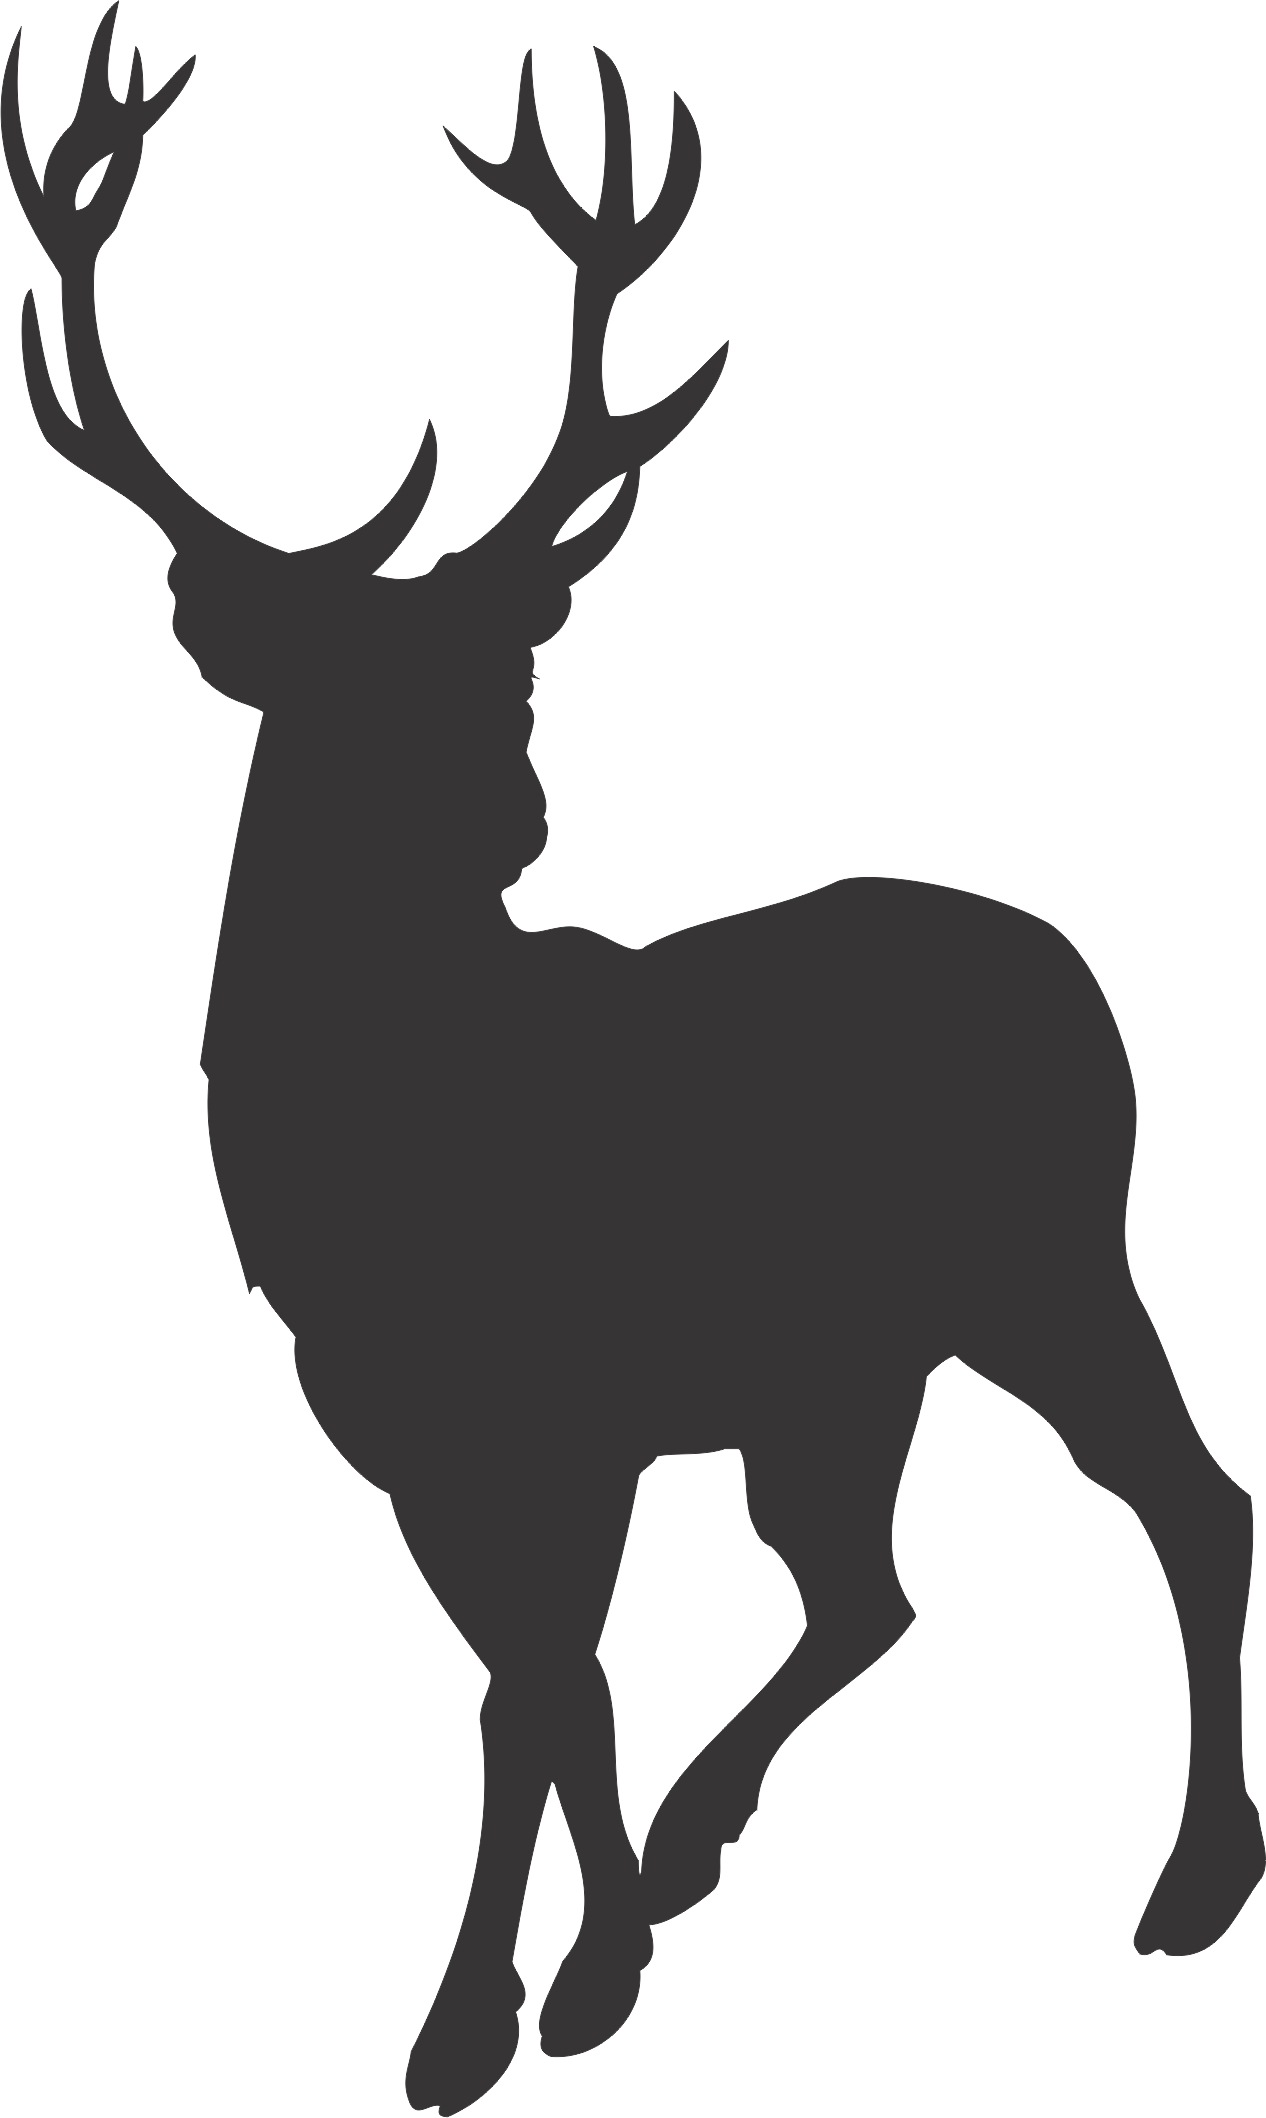 Images For > Deer Silhouette